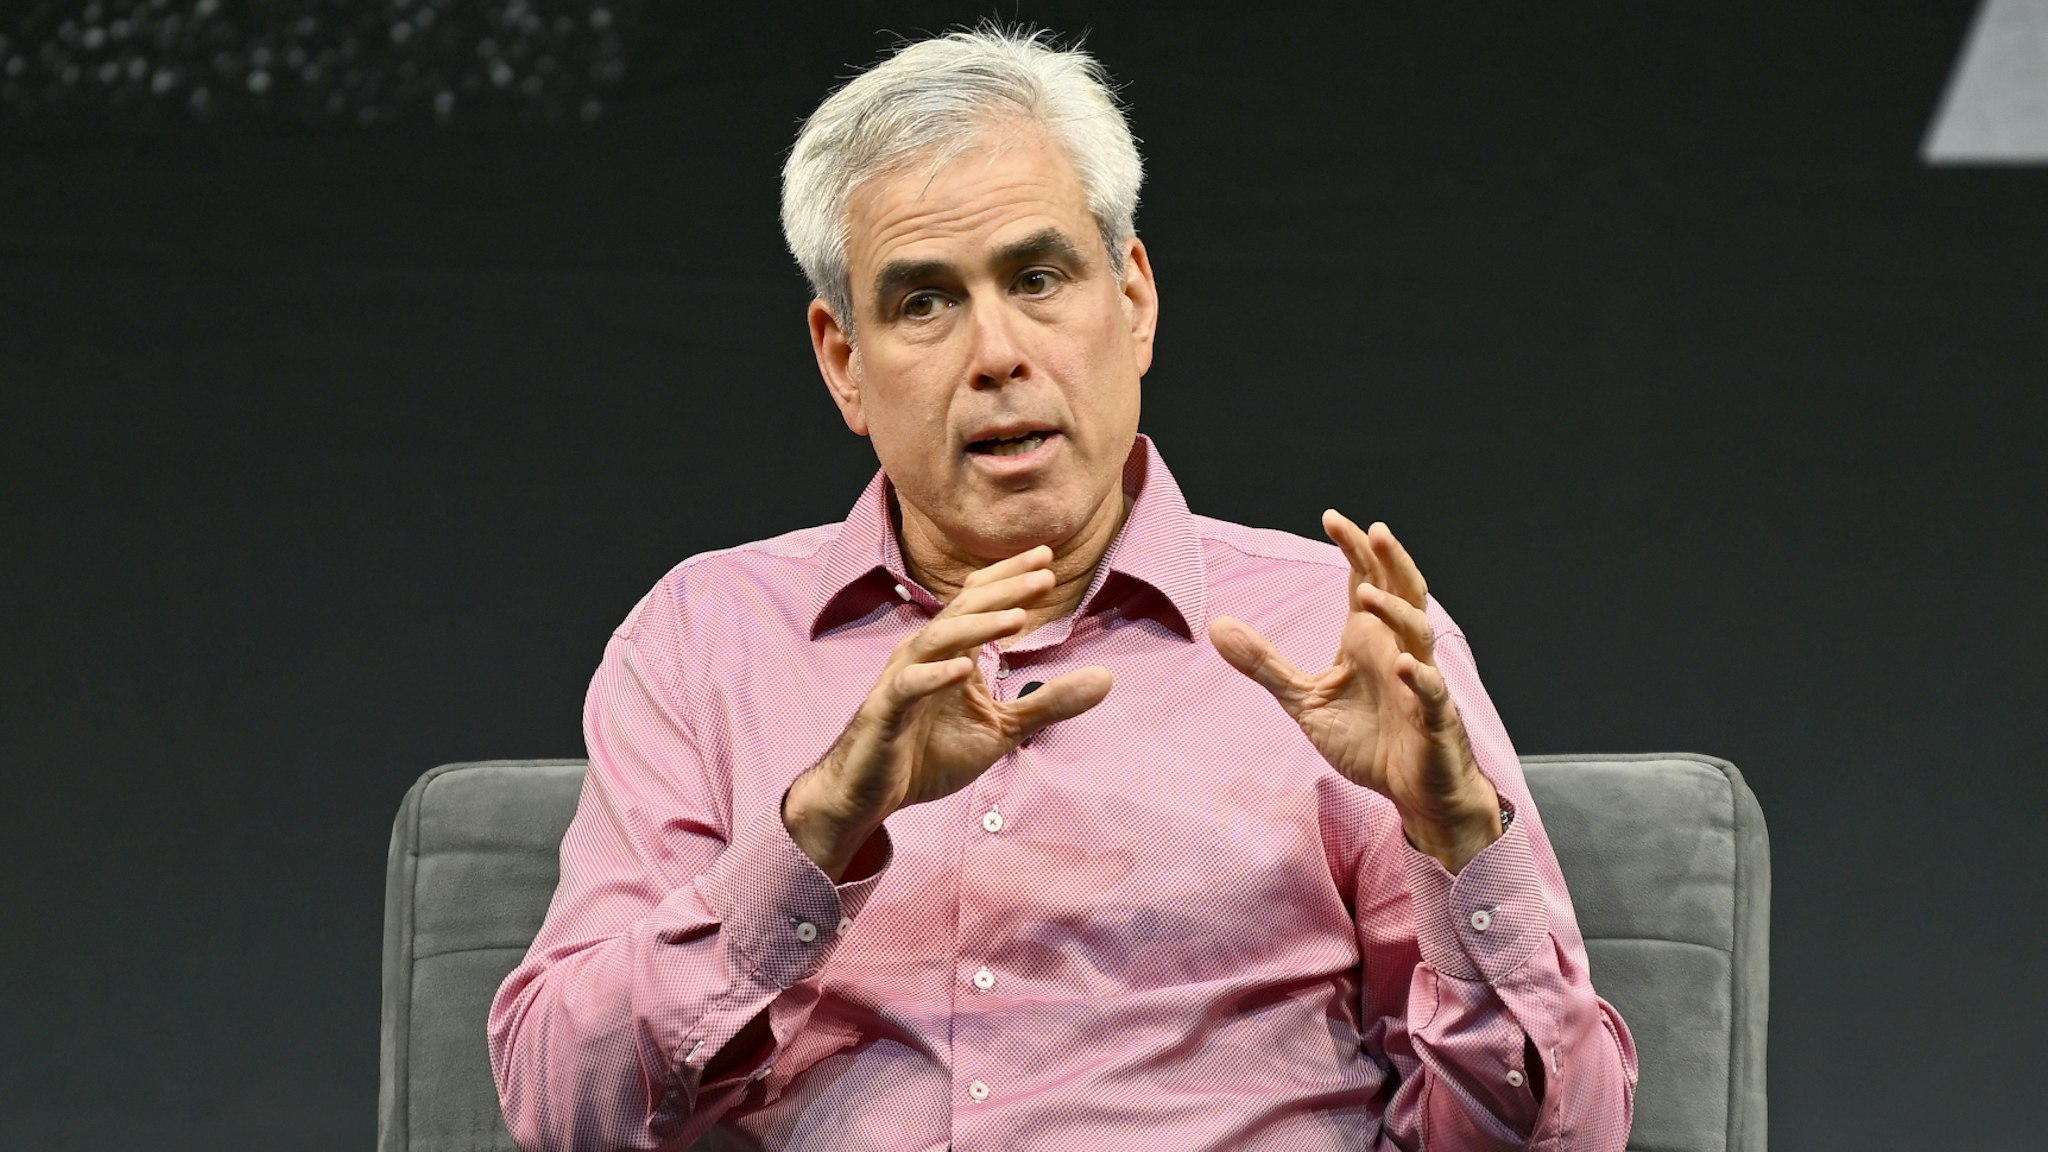 NEW YORK, NEW YORK - SEPTEMBER 22: Jonathan Haidt speaks onstage during Unfinished Live at The Shed on September 22, 2022 in New York City.